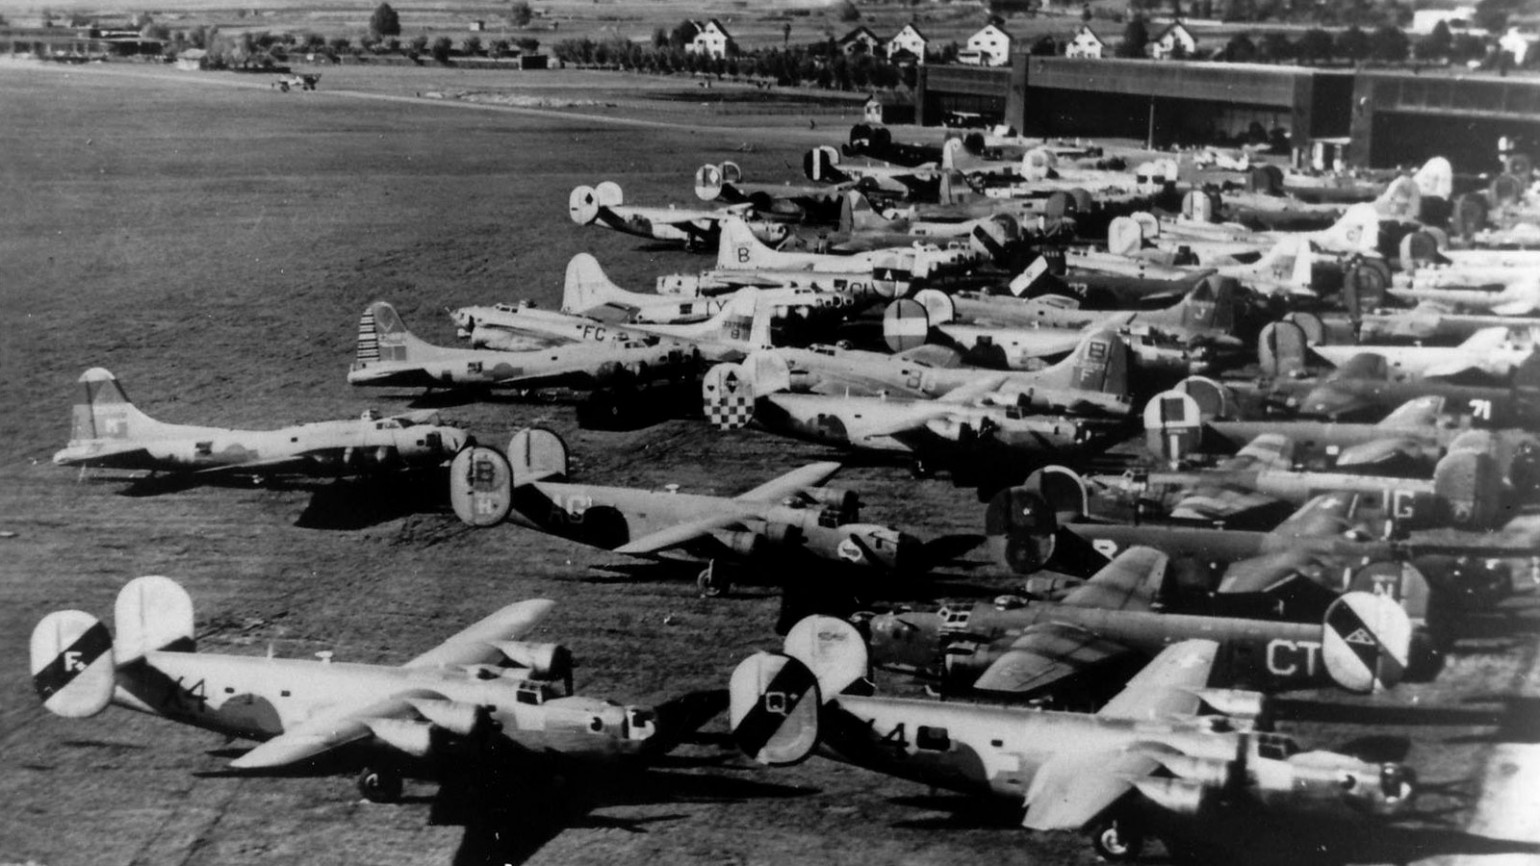 USA Air Force bombers interned at Duebendorf air base in Switzerland, 1944.